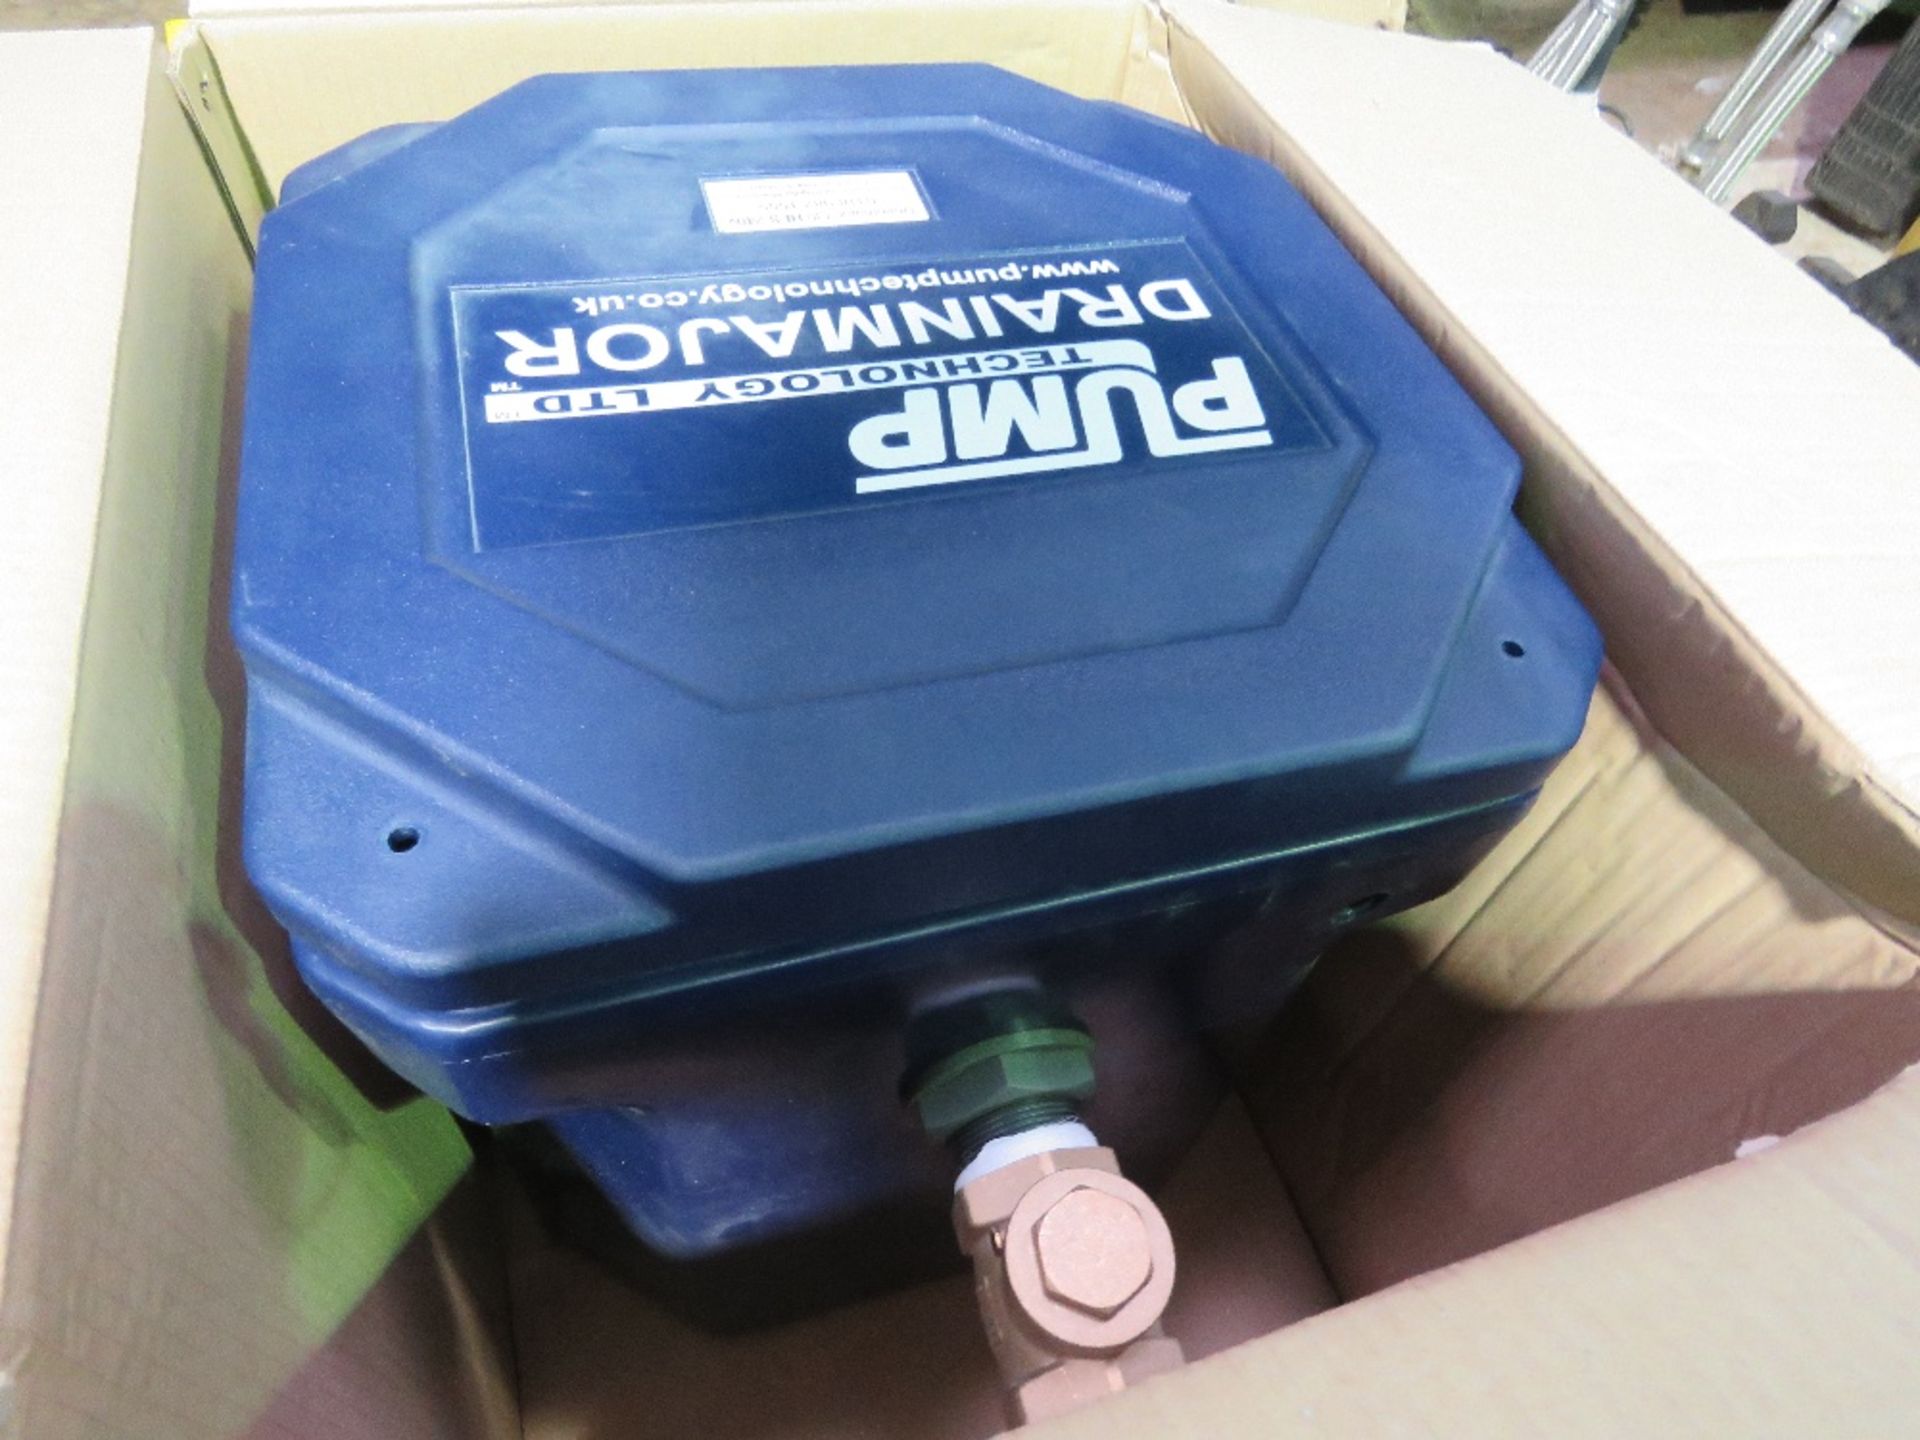 PUMP TECHNOLOGY PTL730 WATER PUMPING TANK UNIT, BOXED, APPEARS UNUSED.....THIS LOT IS SOLD UNDER THE